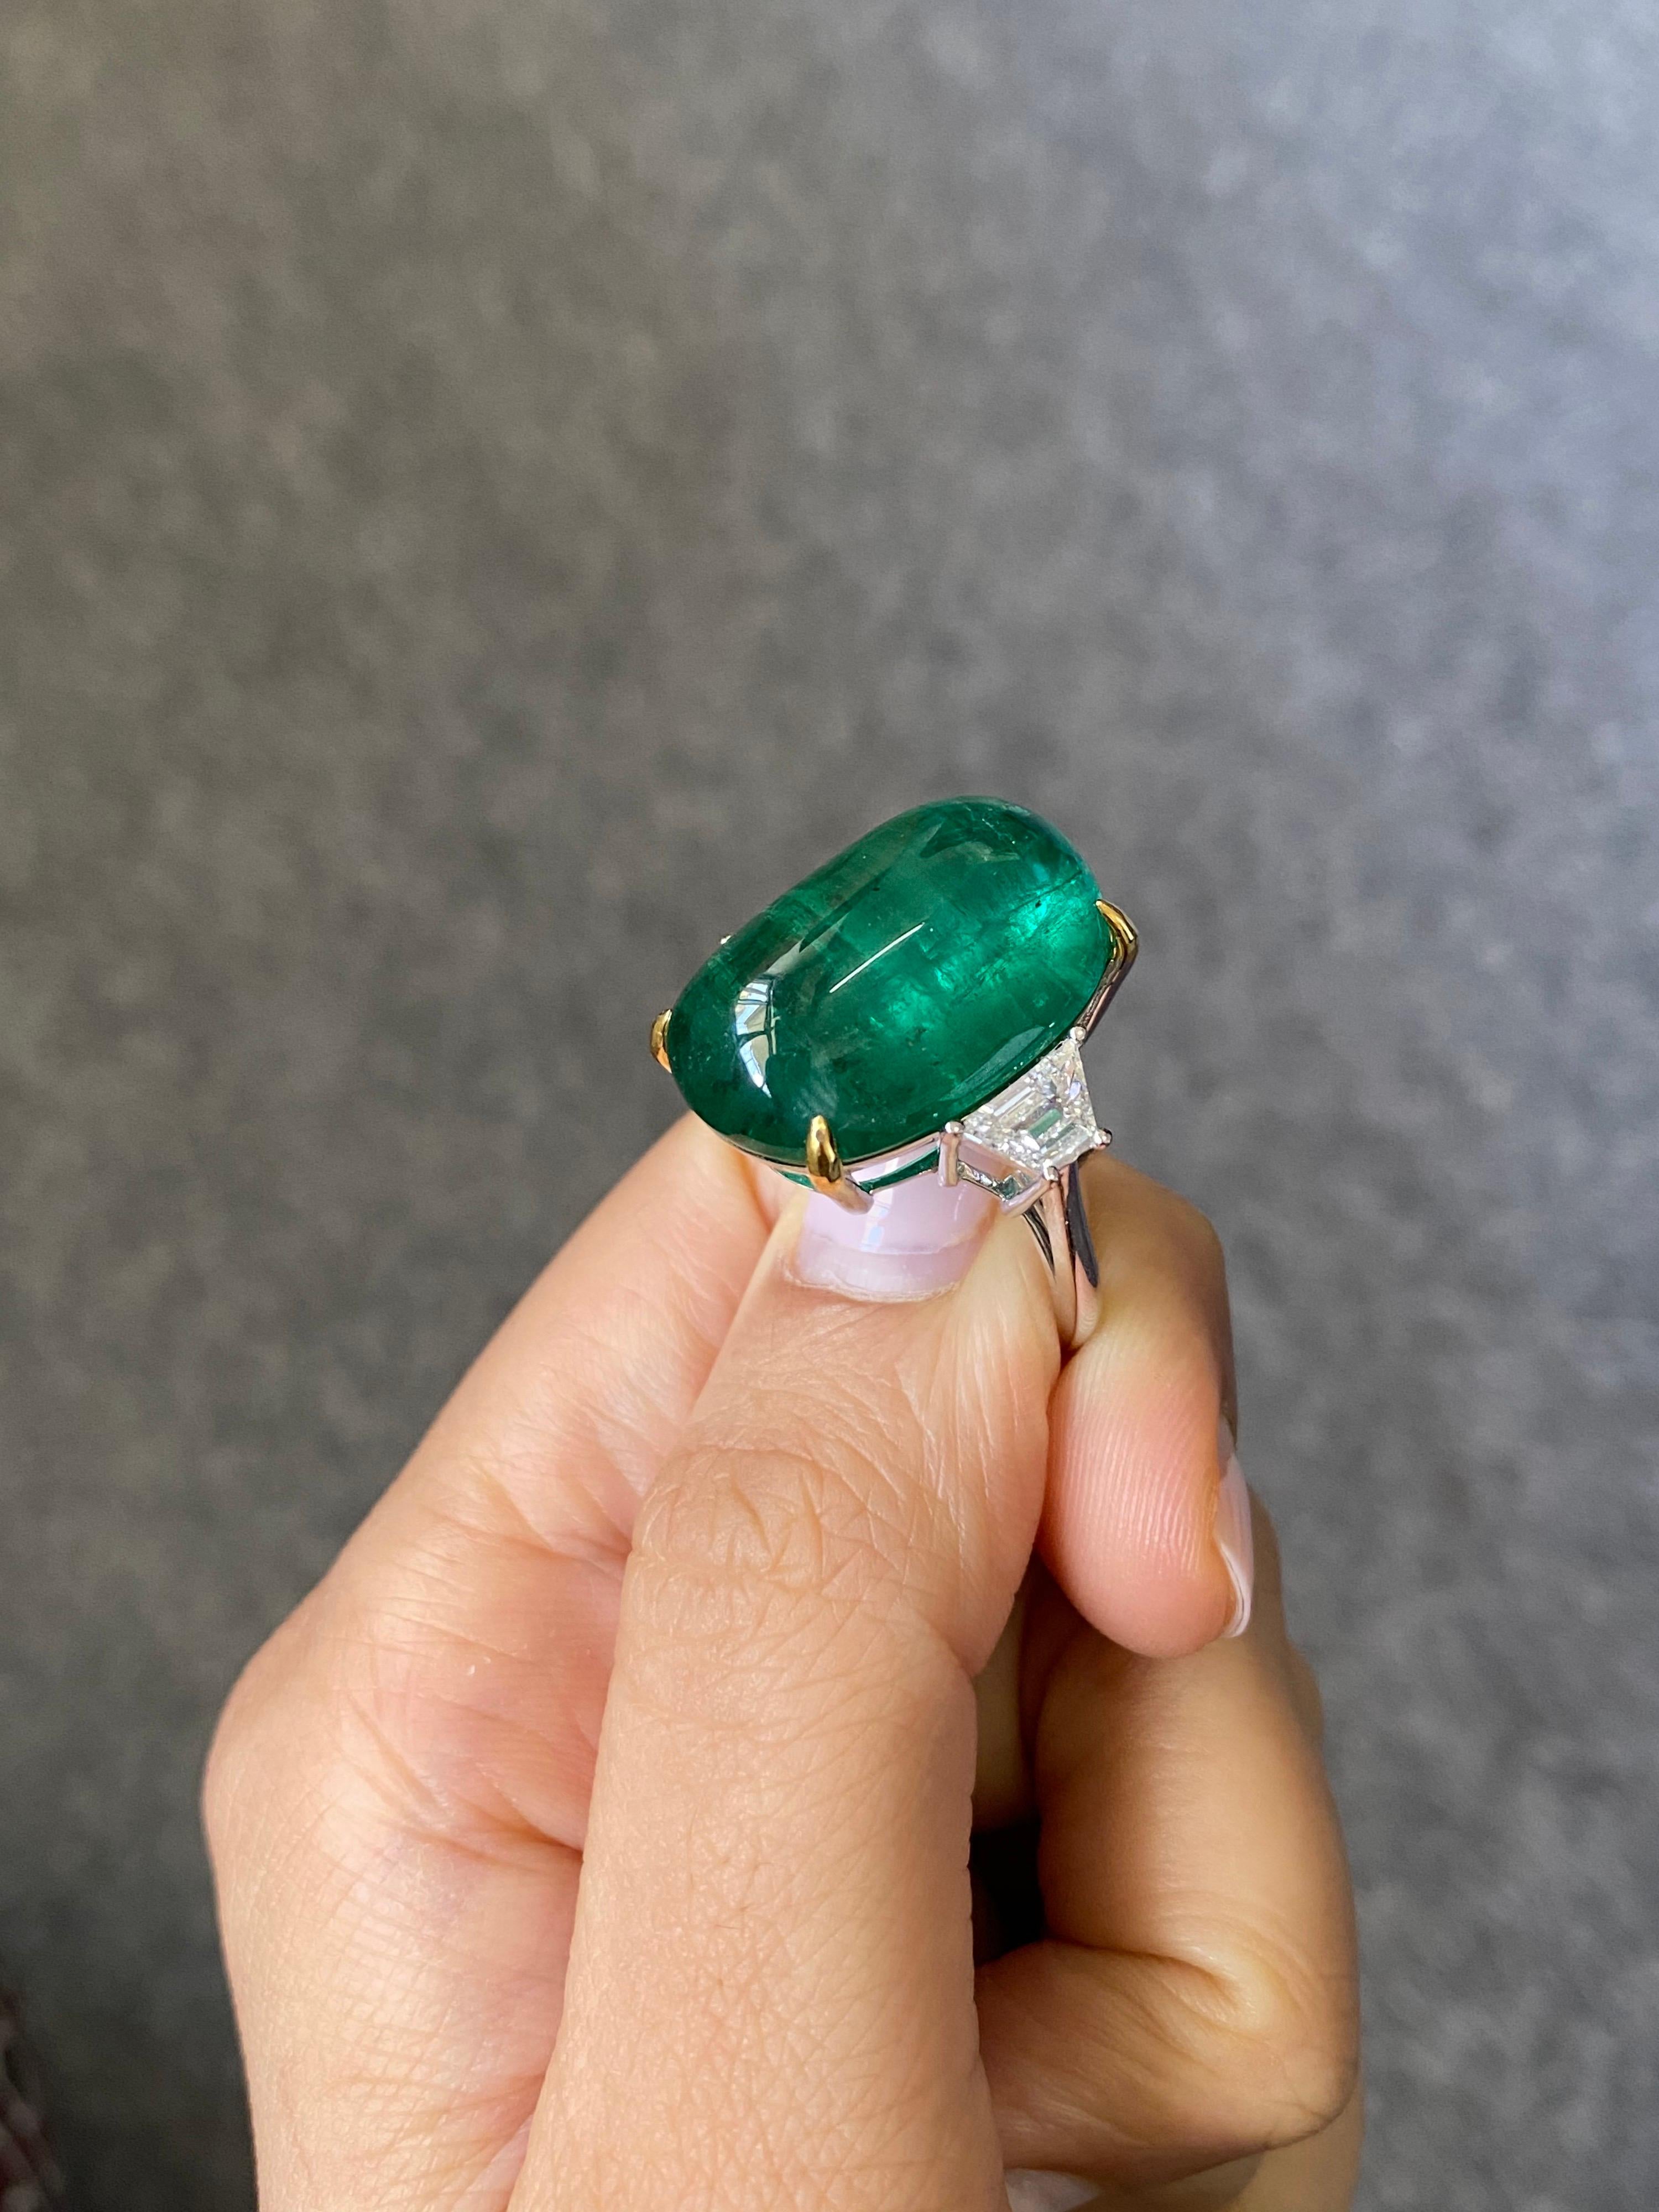 One of a kind, unisex, 23.82 carat natural Zambian Emerald cabochon three-stone engagement ring, with 0.89 carat trapeze VS quality  White Diamonds. The centre stone is transparent, with an idea vivid green color and beautiful luster. The Diamonds